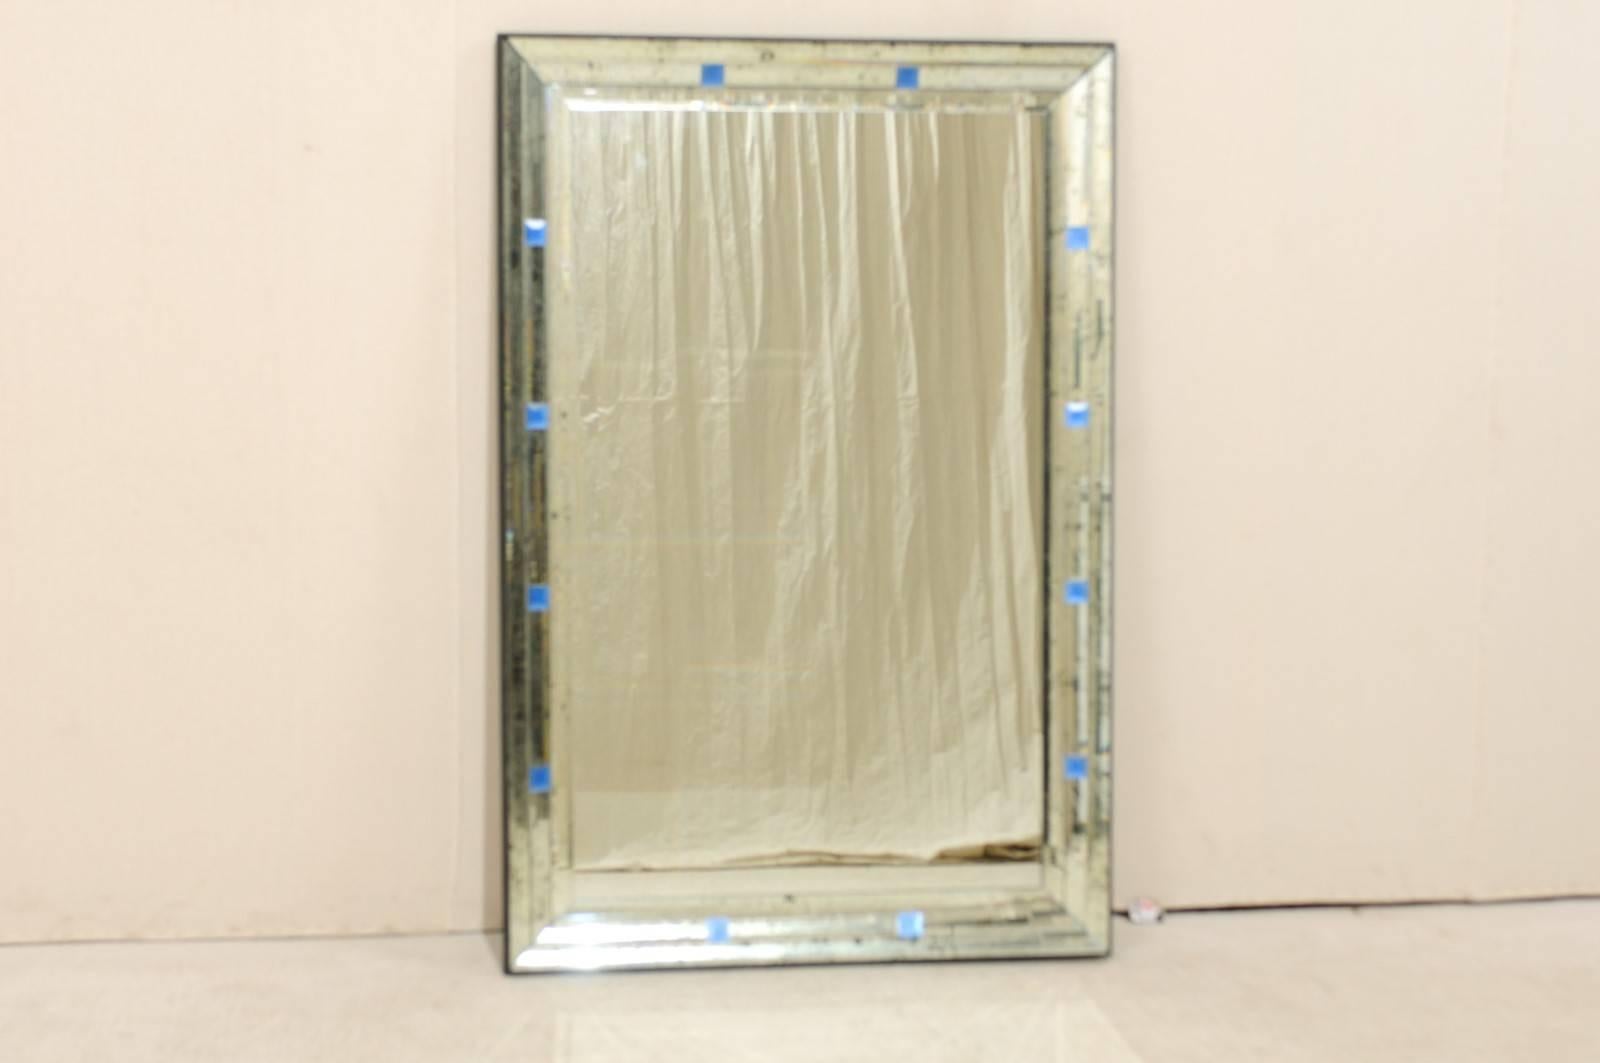 A pair of large-sized rectangular mirrors with small painted blue églomisé square glass accents and antiquing throughout its border. These mirrors also have a nice thin black frame around their edges. With the simplicity of its lines and discreet